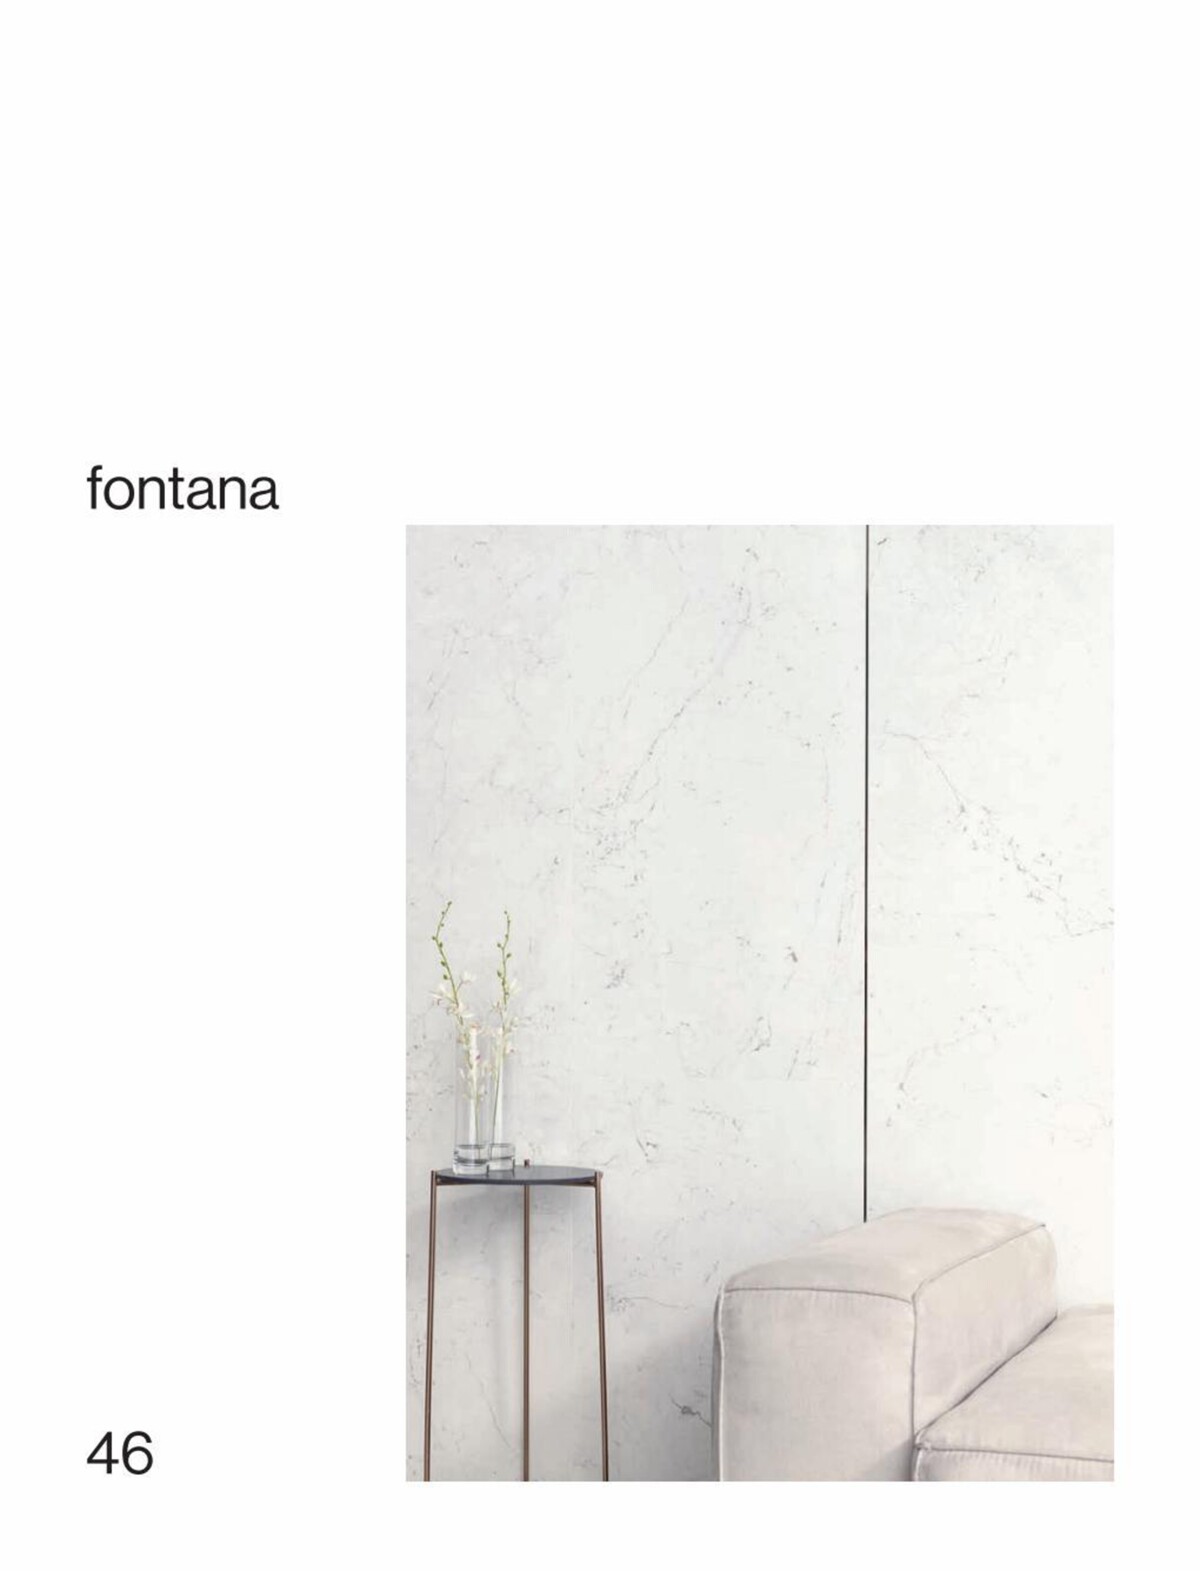 Catalogue MARMI,a ceramic tile that echoes the purity of marble, page 00046